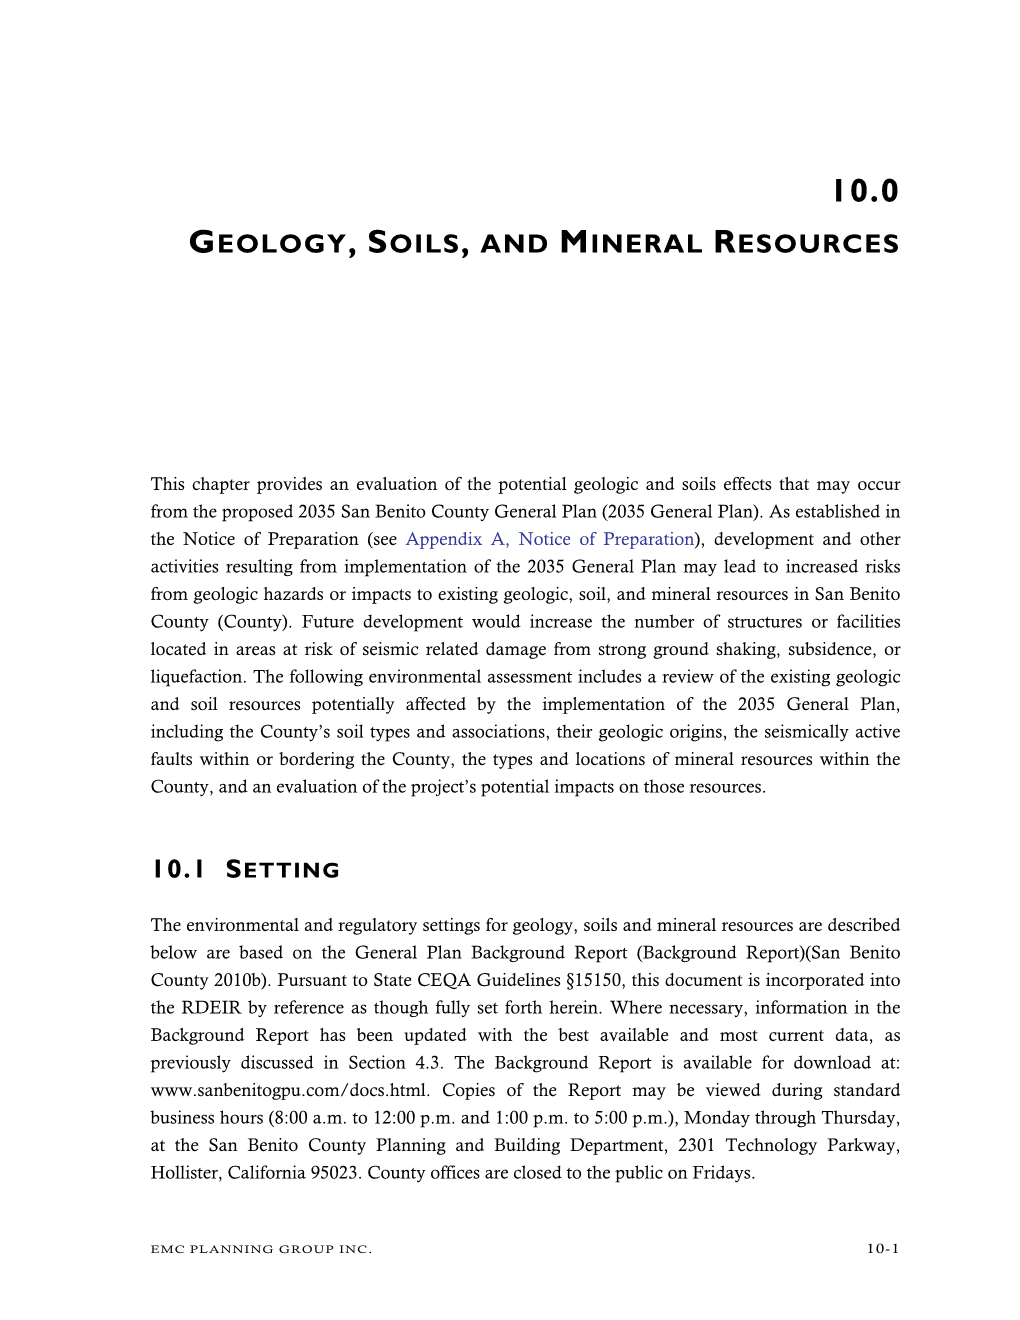 Geology, Soils, and Mineral Resources 10.1 Setting